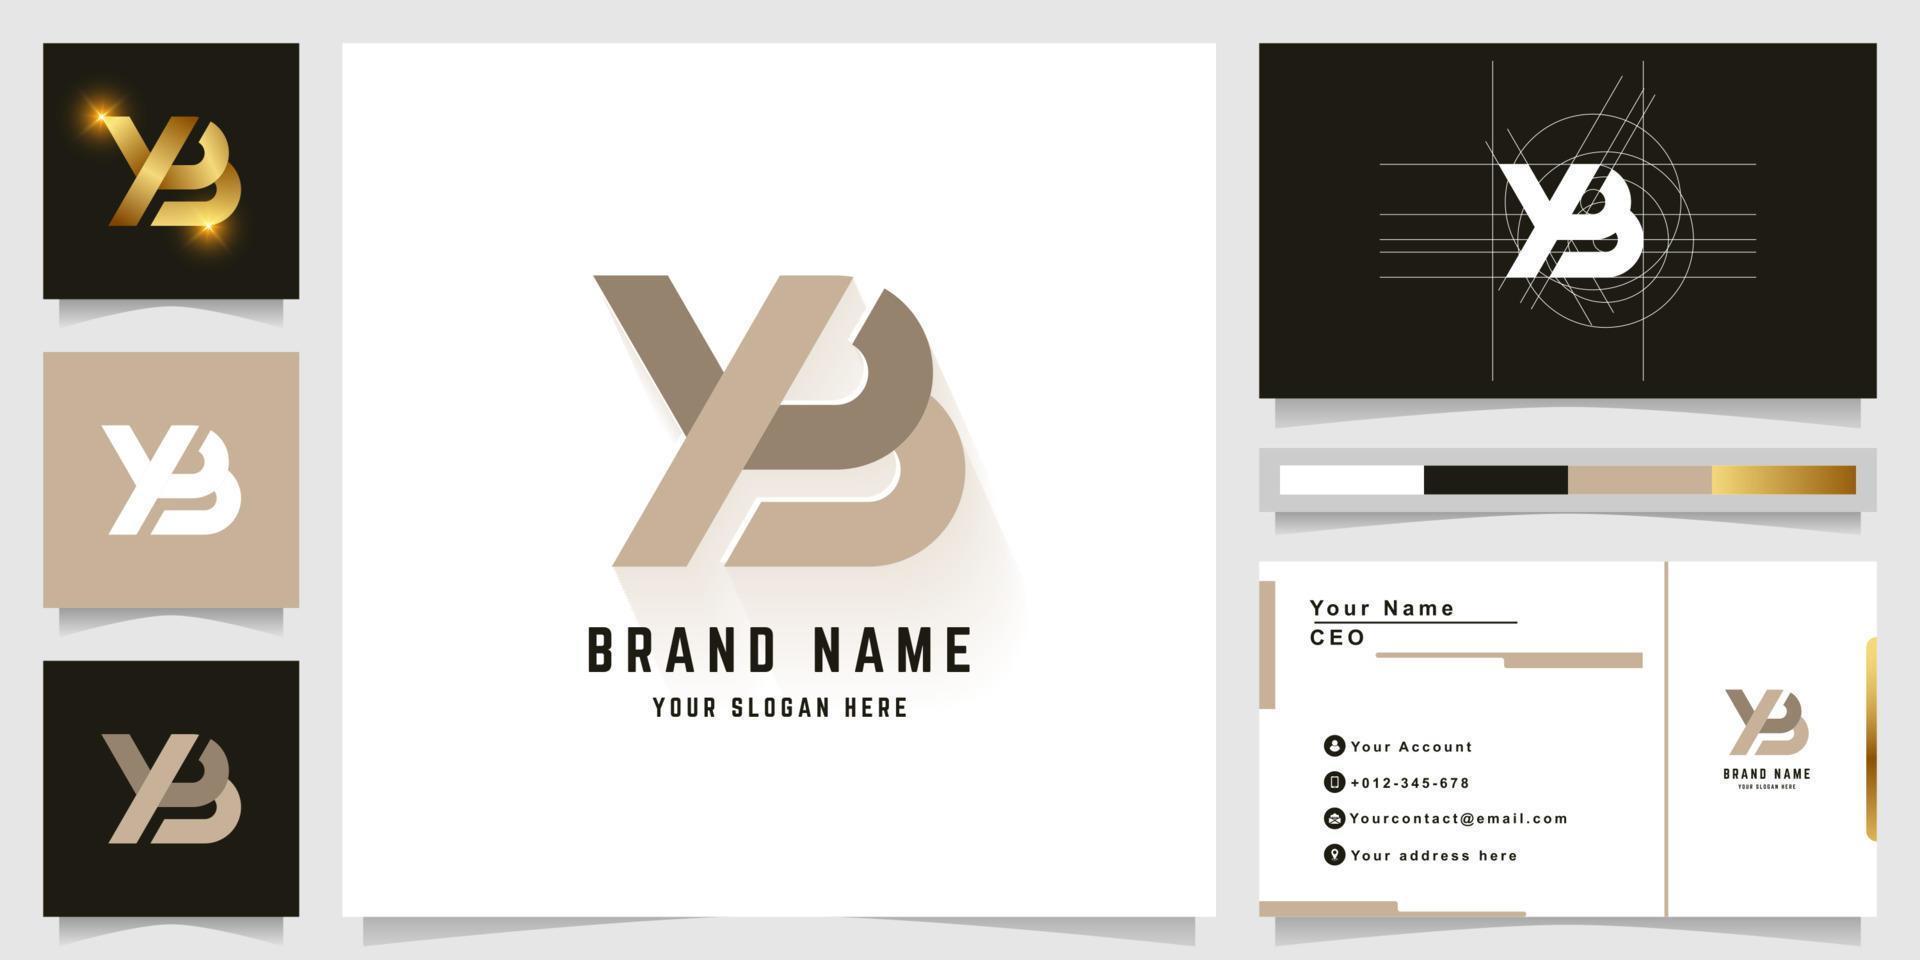 Letter YB or XB monogram logo with business card design vector